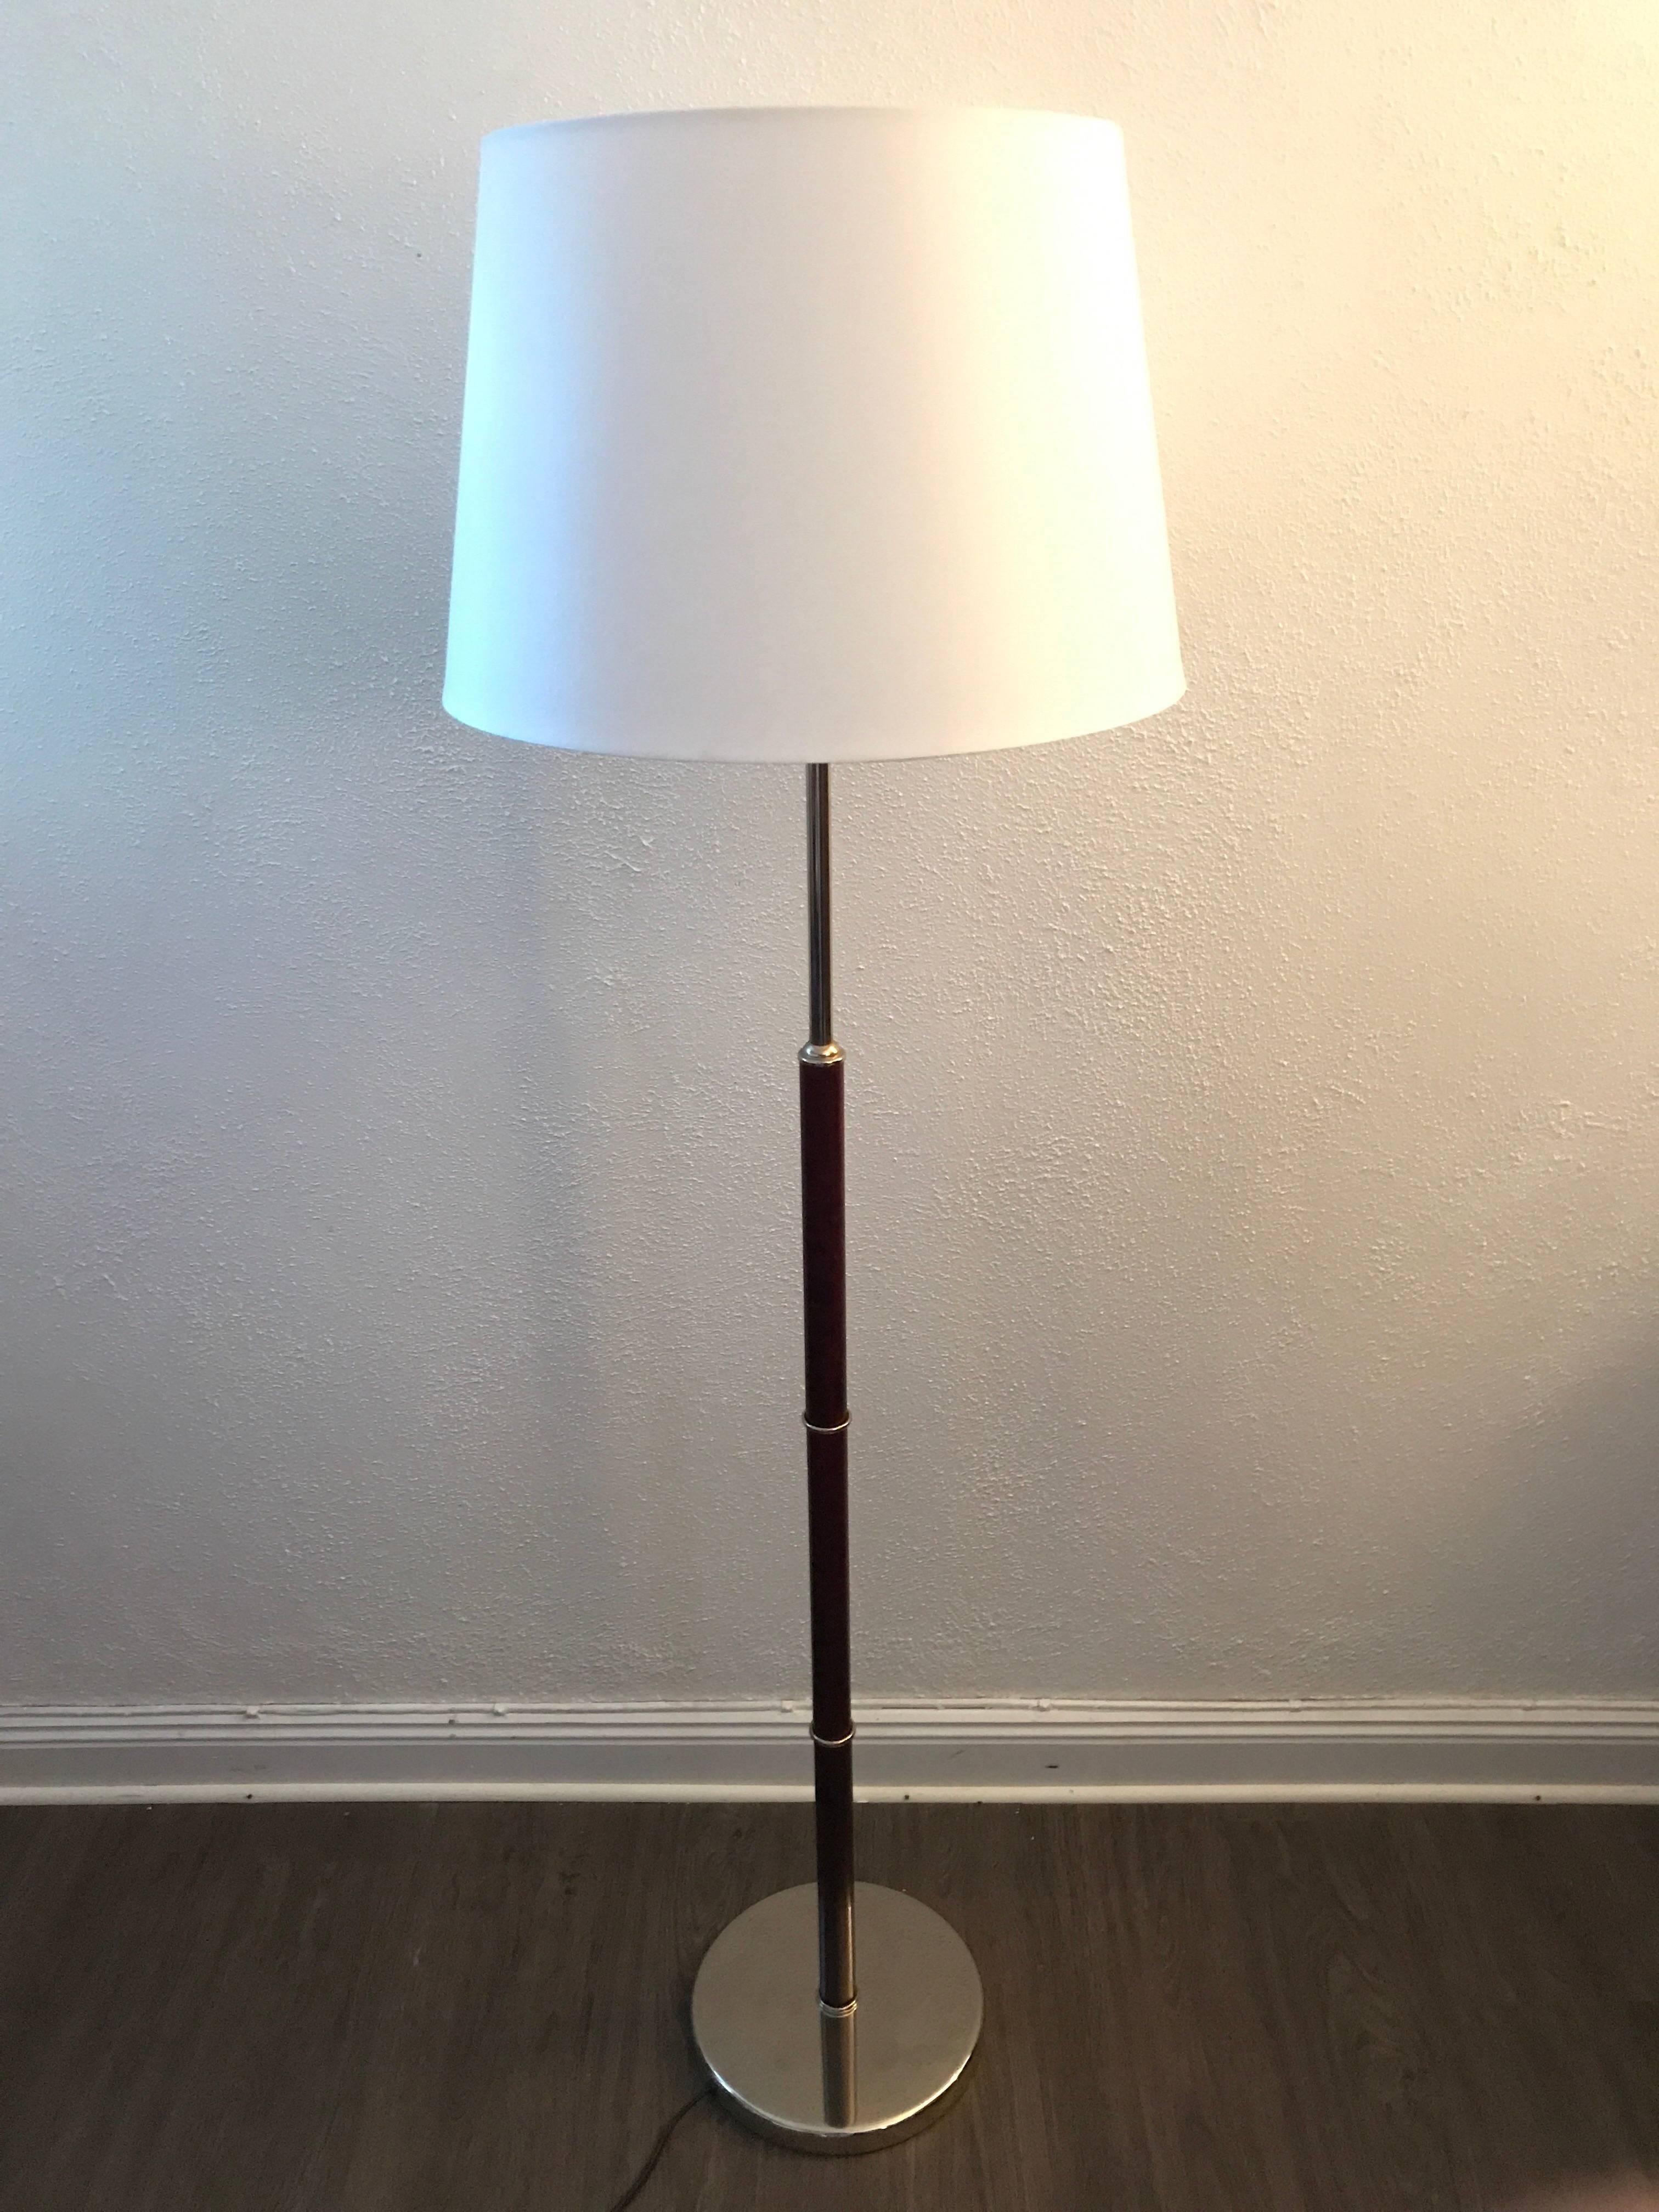 Rare Swedish Cherrywood and Steel Floor Lamp Made by Belid AB, 1980 In Excellent Condition For Sale In Drottningholm, SE